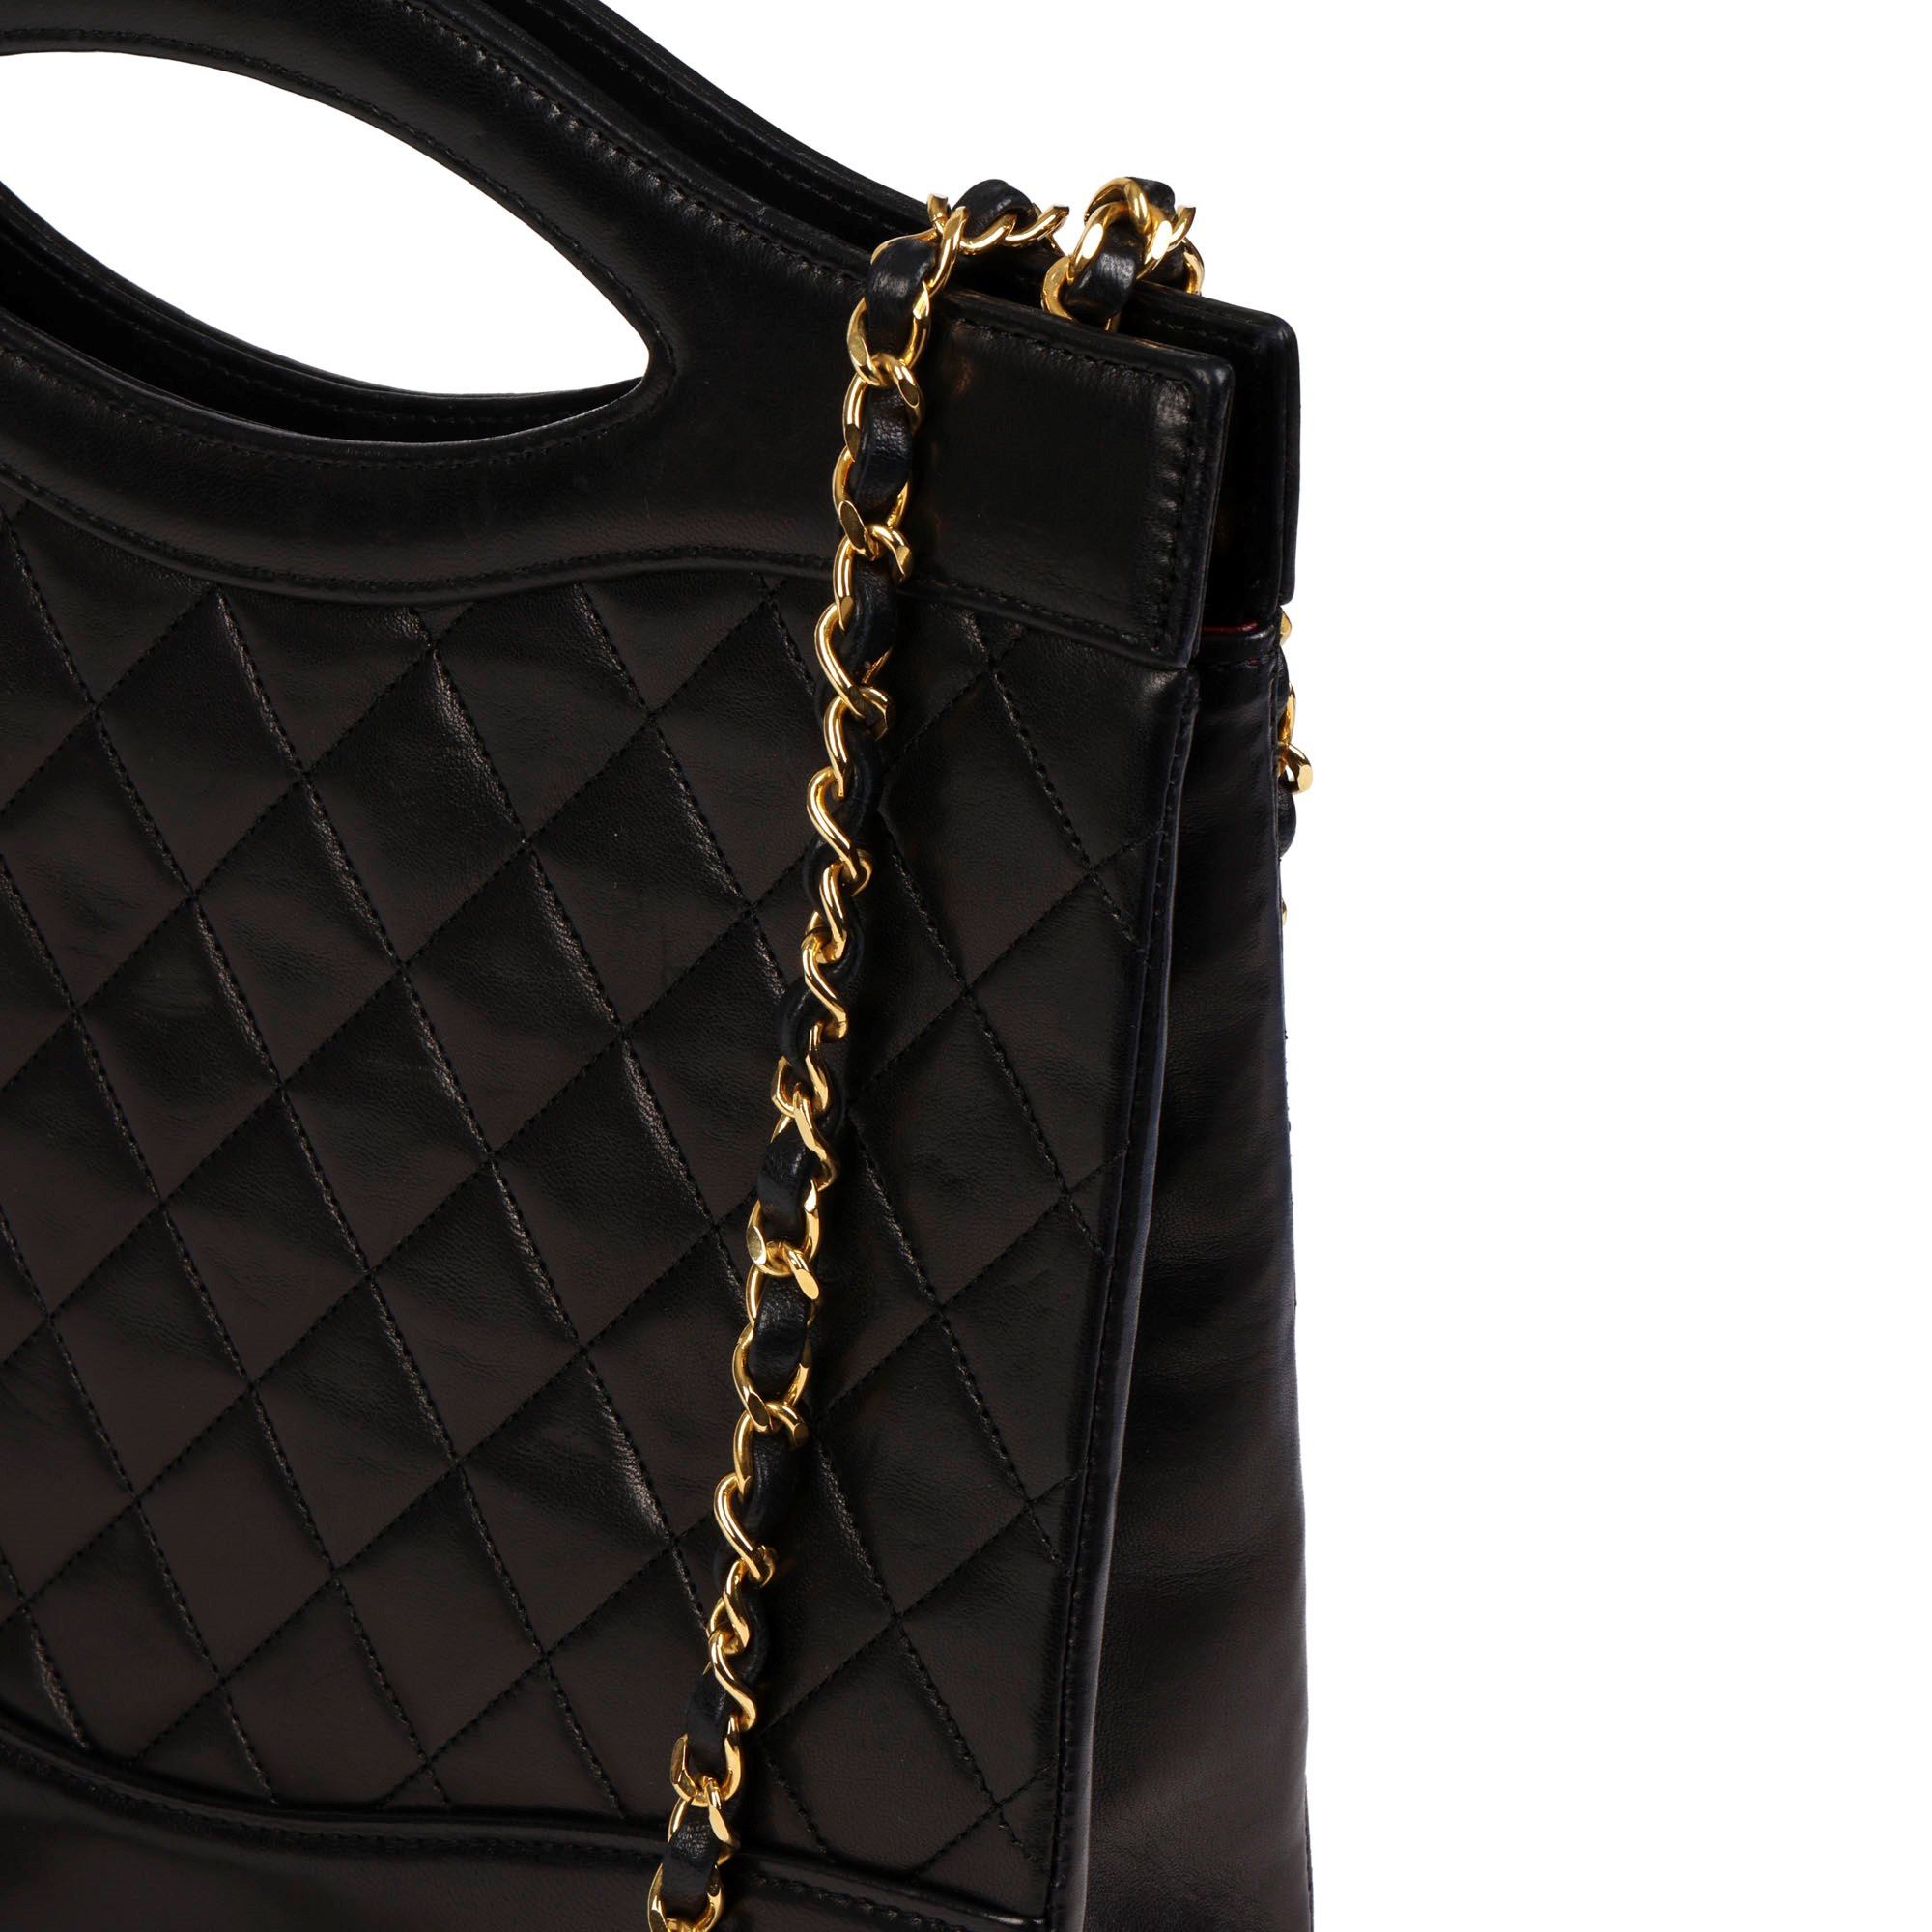 Chanel Black Quilted & Smooth Lambskin Vintage Classic Shoulder Tote